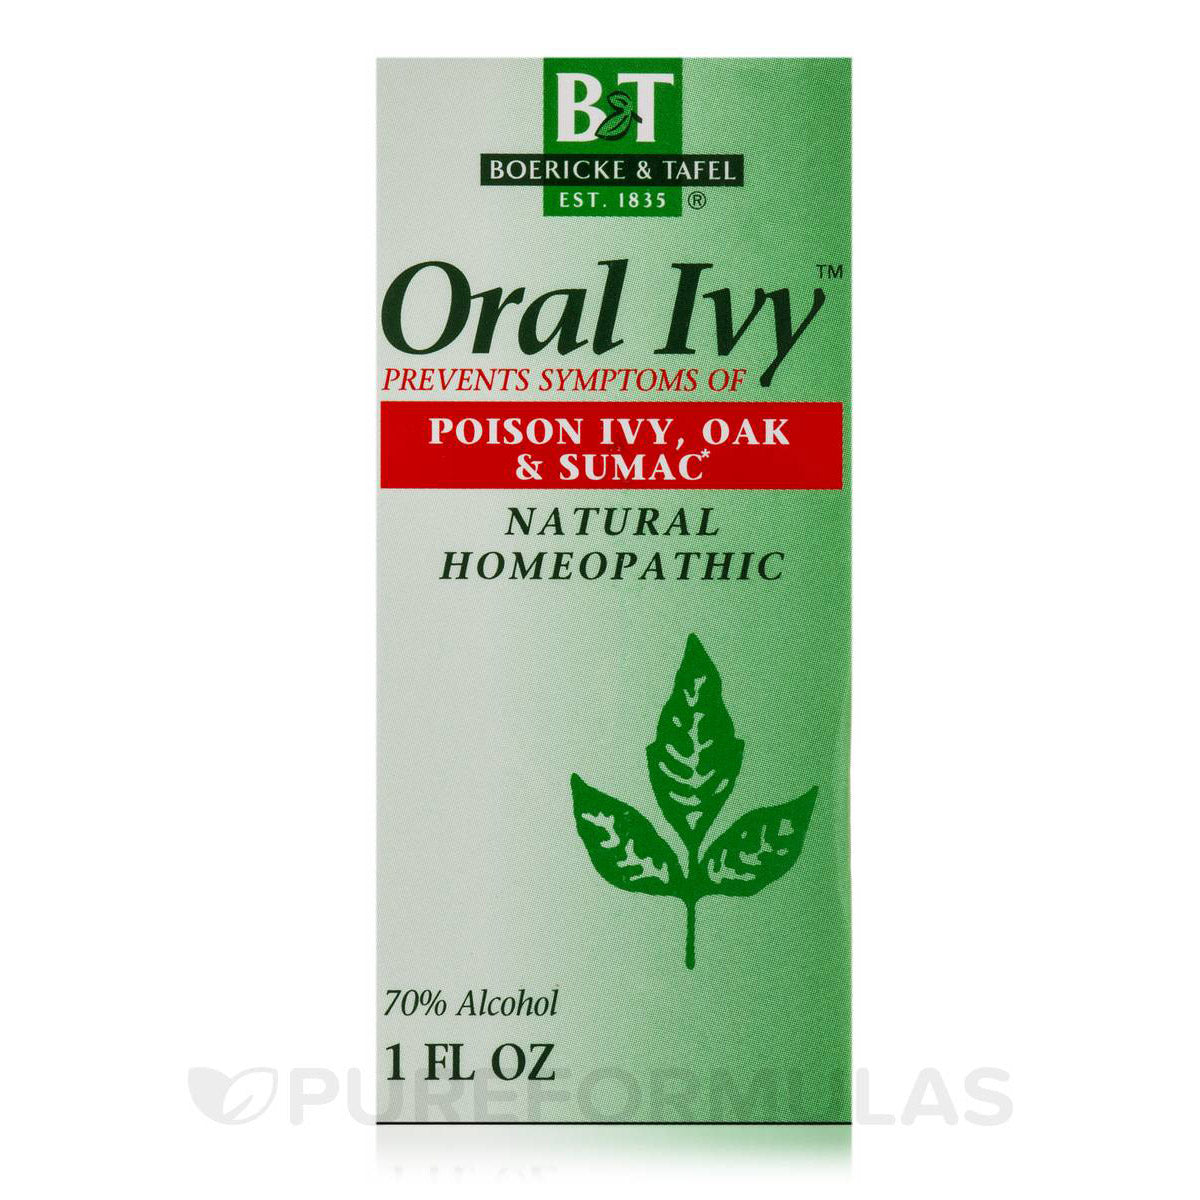 Oral Ivy for Natural Homeopathic Poison Ivy, Oak & Sumac Relief